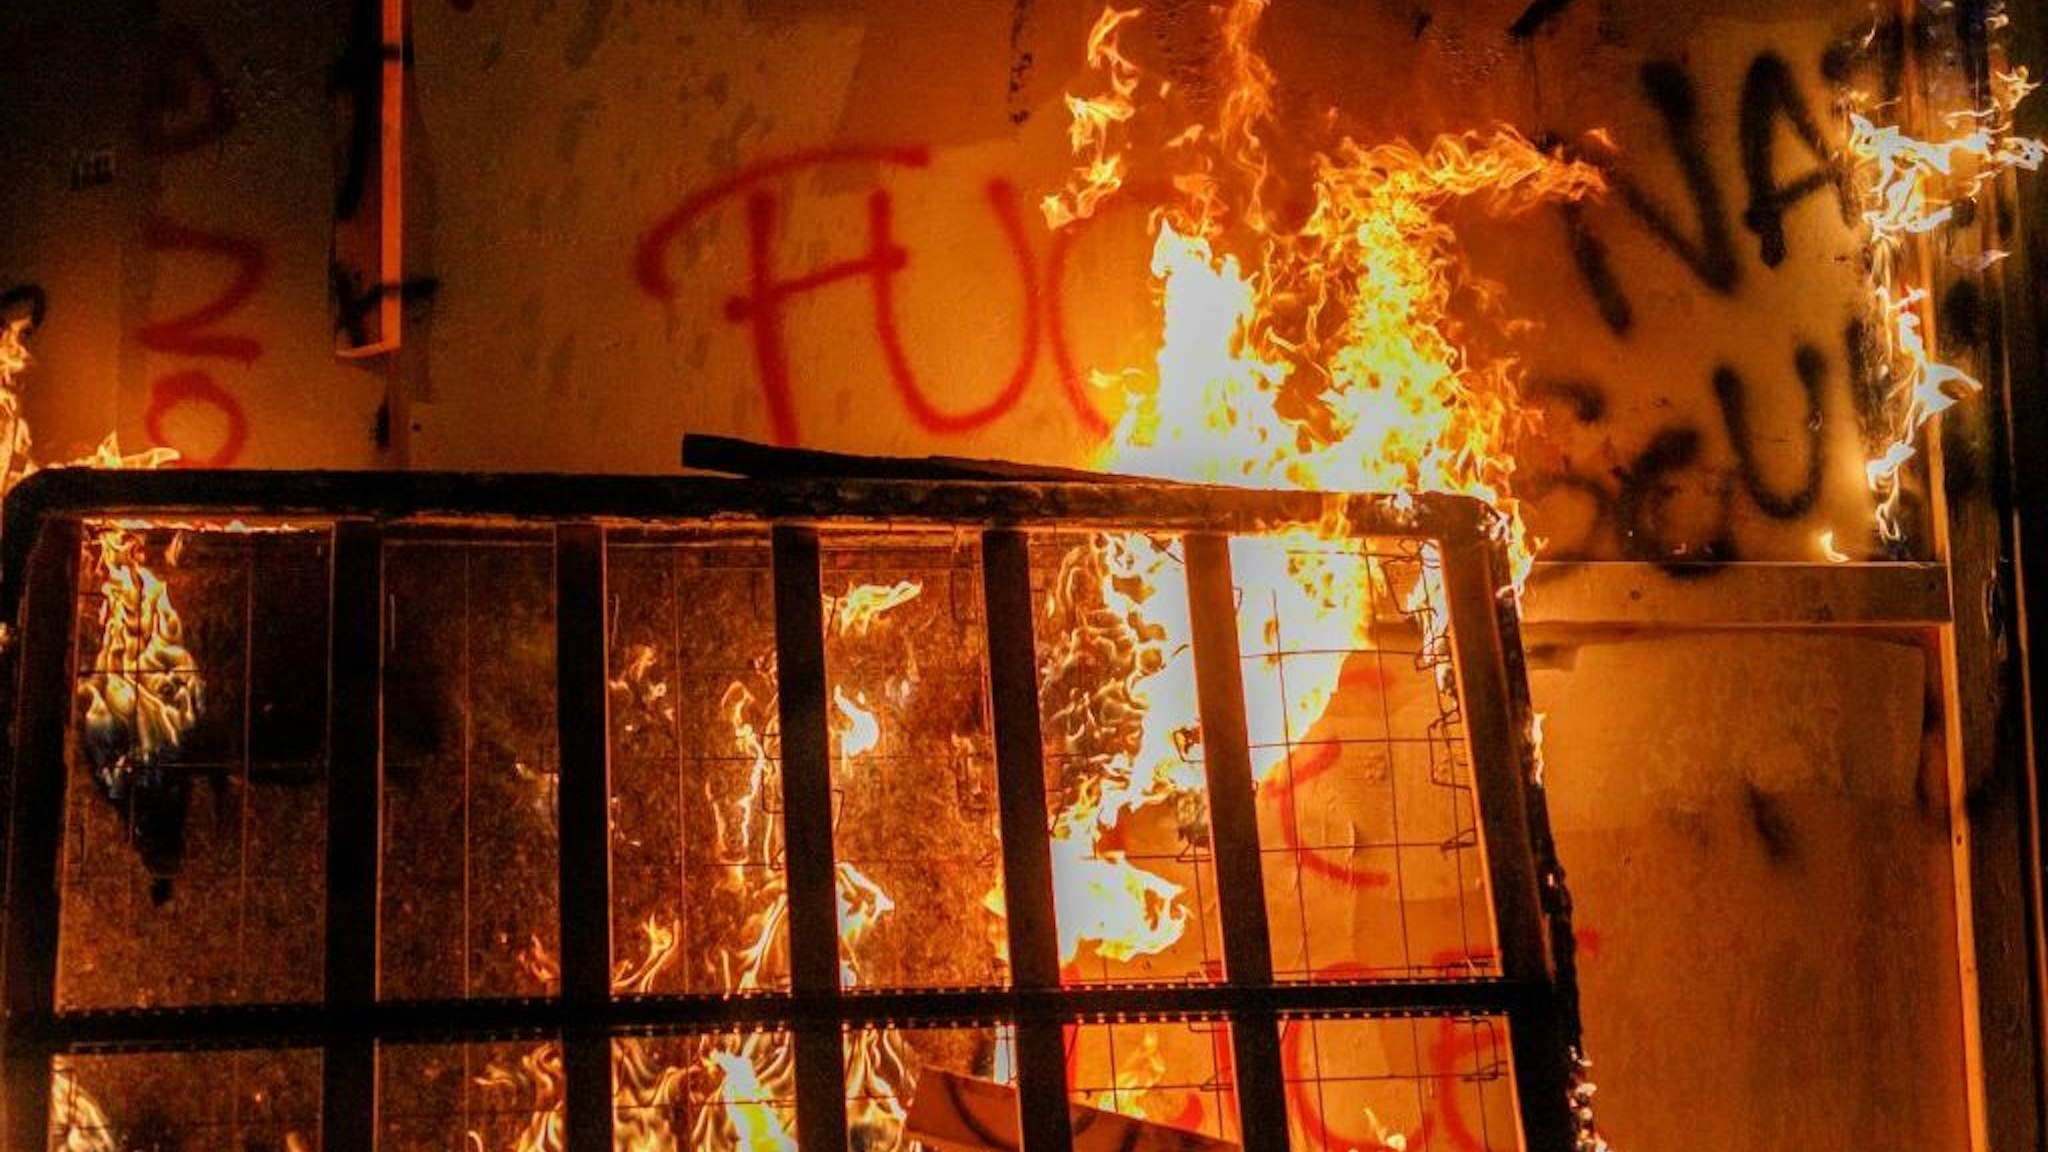 About two hundred persons protesting police brutality spray graffiti and start fires at the Portland Police Union building, in Portland, Oregon, United States on August 28, 2020, the 93rd day of consecutive protests. Police declared a riot and arrested many people. (Photo by John Rudoff/Anadolu Agency via Getty Images)